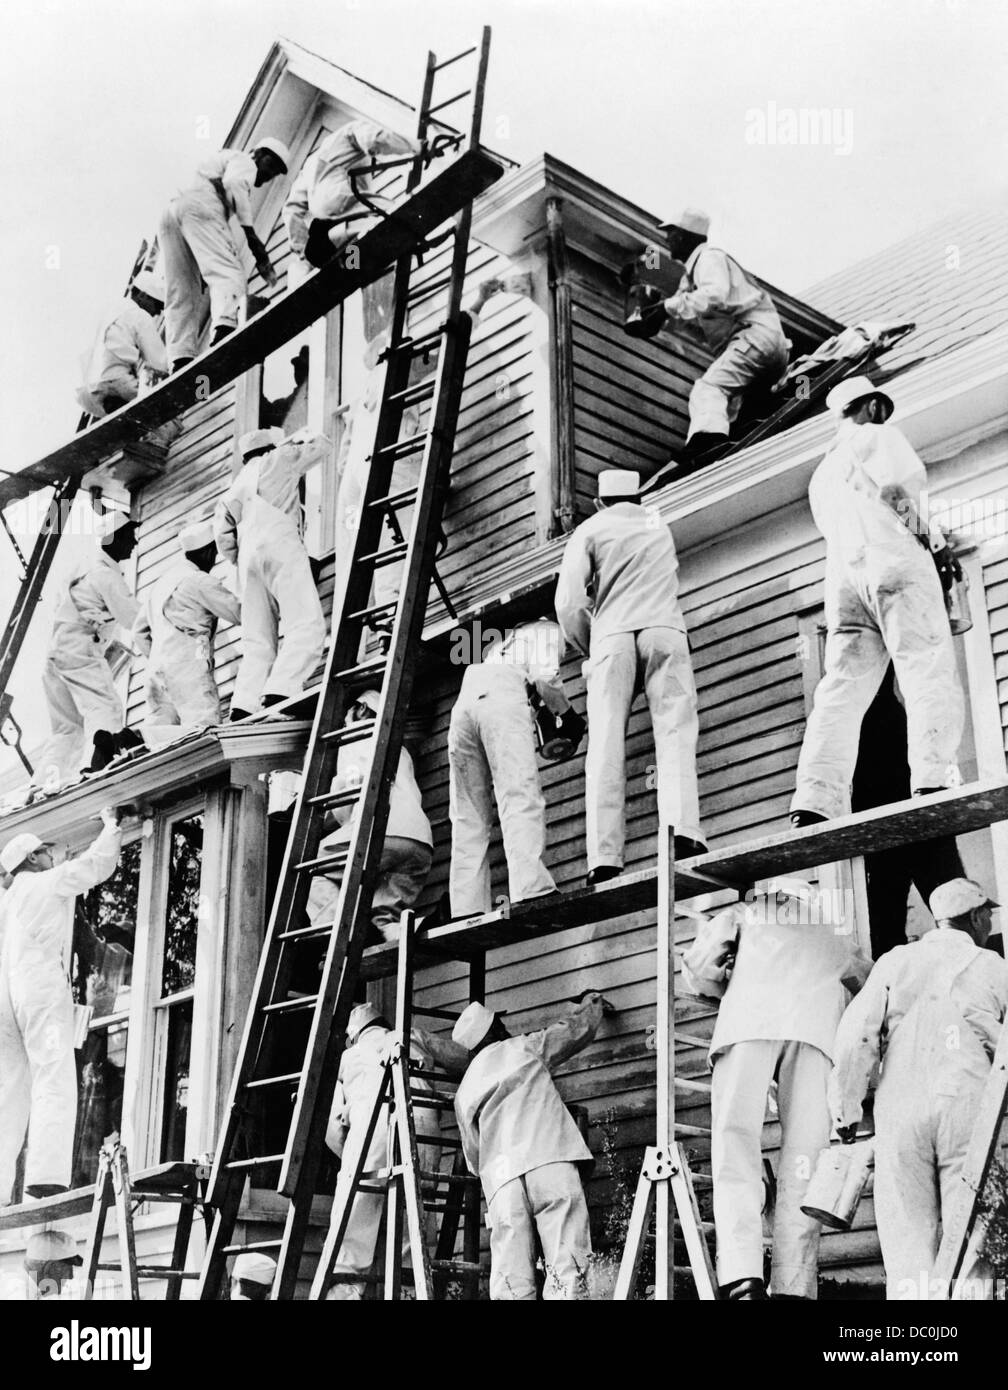 1930s GROUP 18 MEN PAINTERS IN WHITE WORK OVERALLS COVERALLS ON LADDERS AND SCAFFOLDS PAINTING A CLAPBOARD WOOD FRAME HOUSE Stock Photo